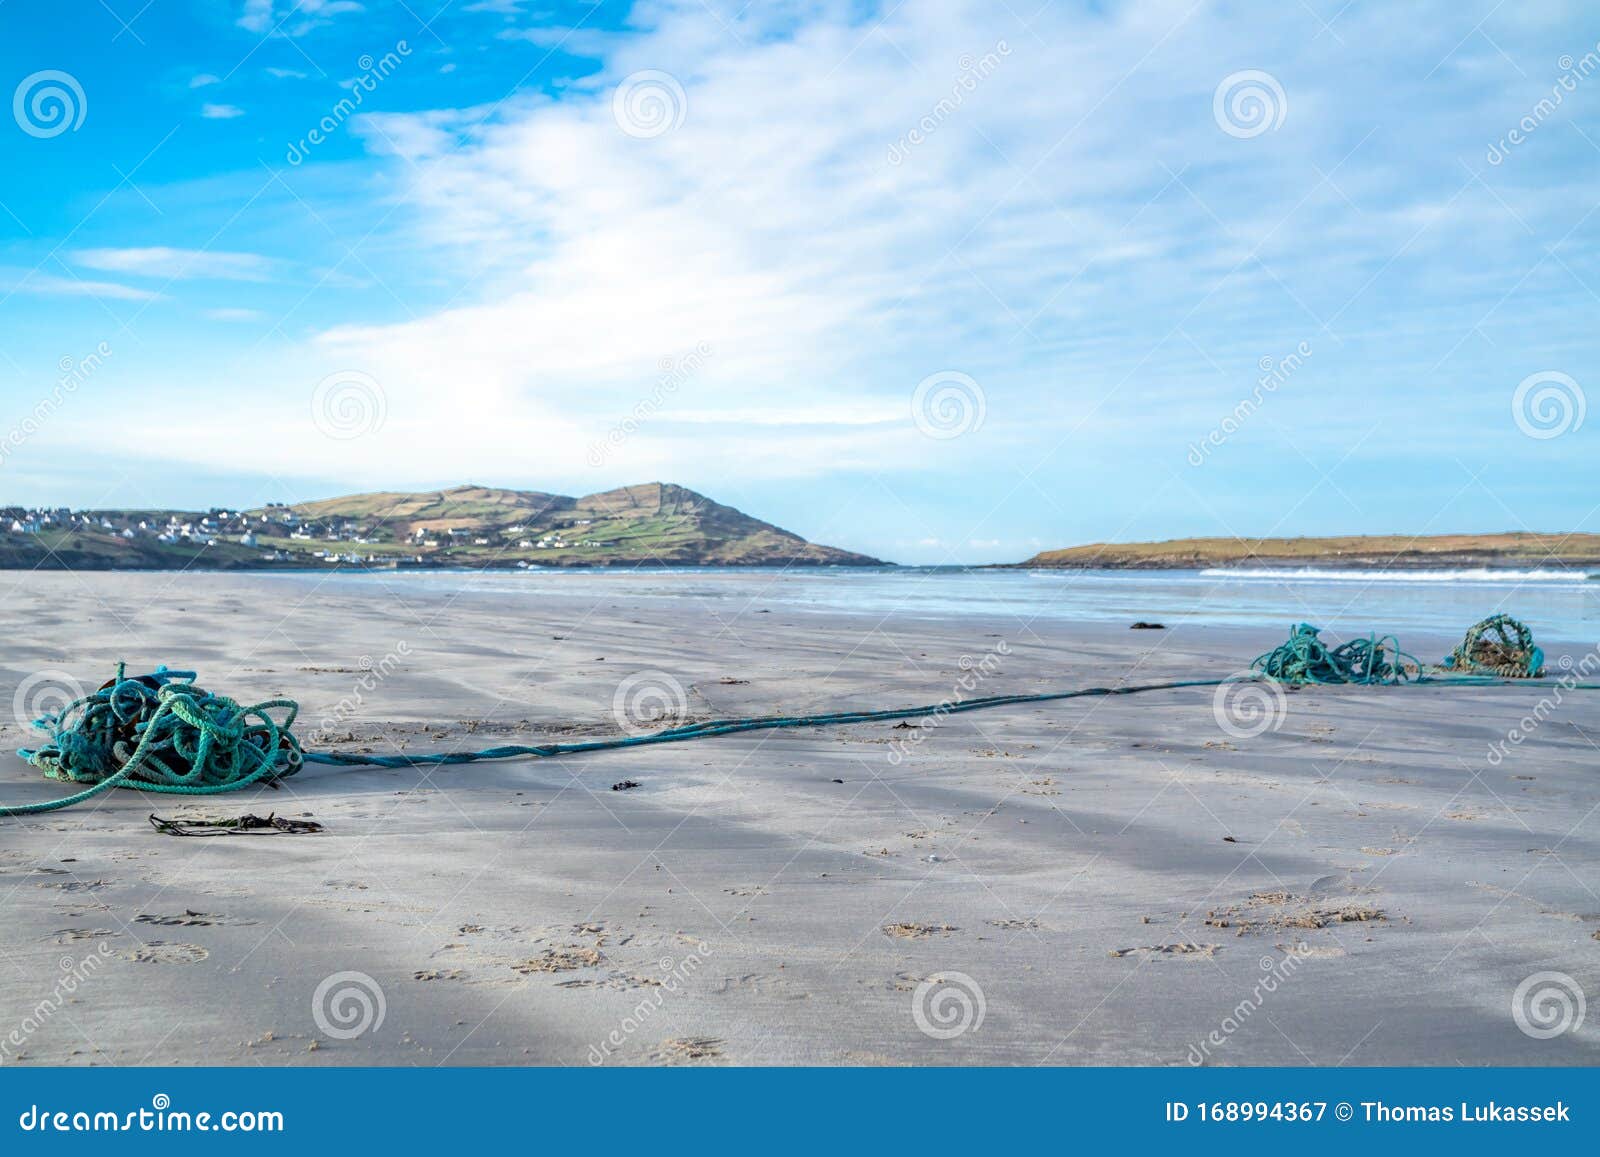 https://thumbs.dreamstime.com/z/buoy-crab-trap-washed-up-portnoo-beach-strong-storm-donegal-ireland-168994367.jpg